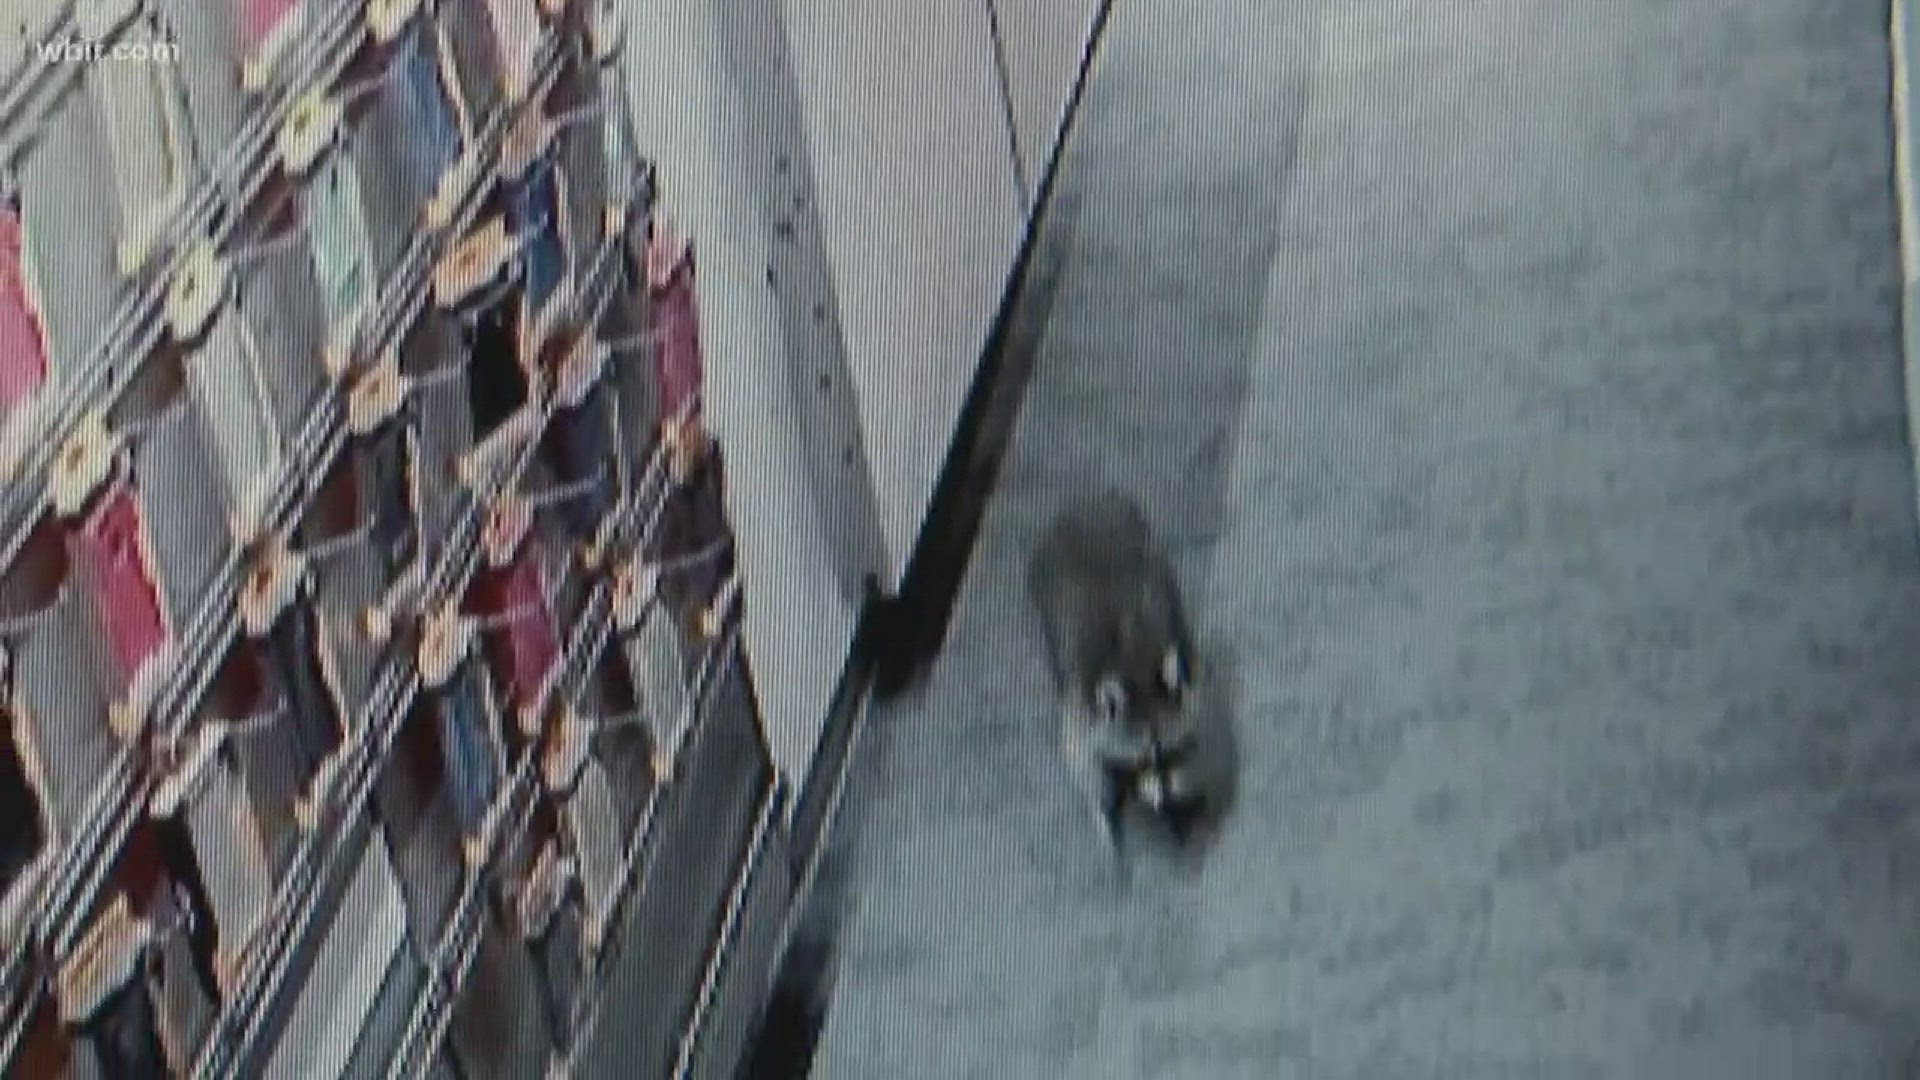 Knoxville Police found an adorable and unexpected suspect when they responded to a burglary alarm at a local Boost Mobile store Monday morning.